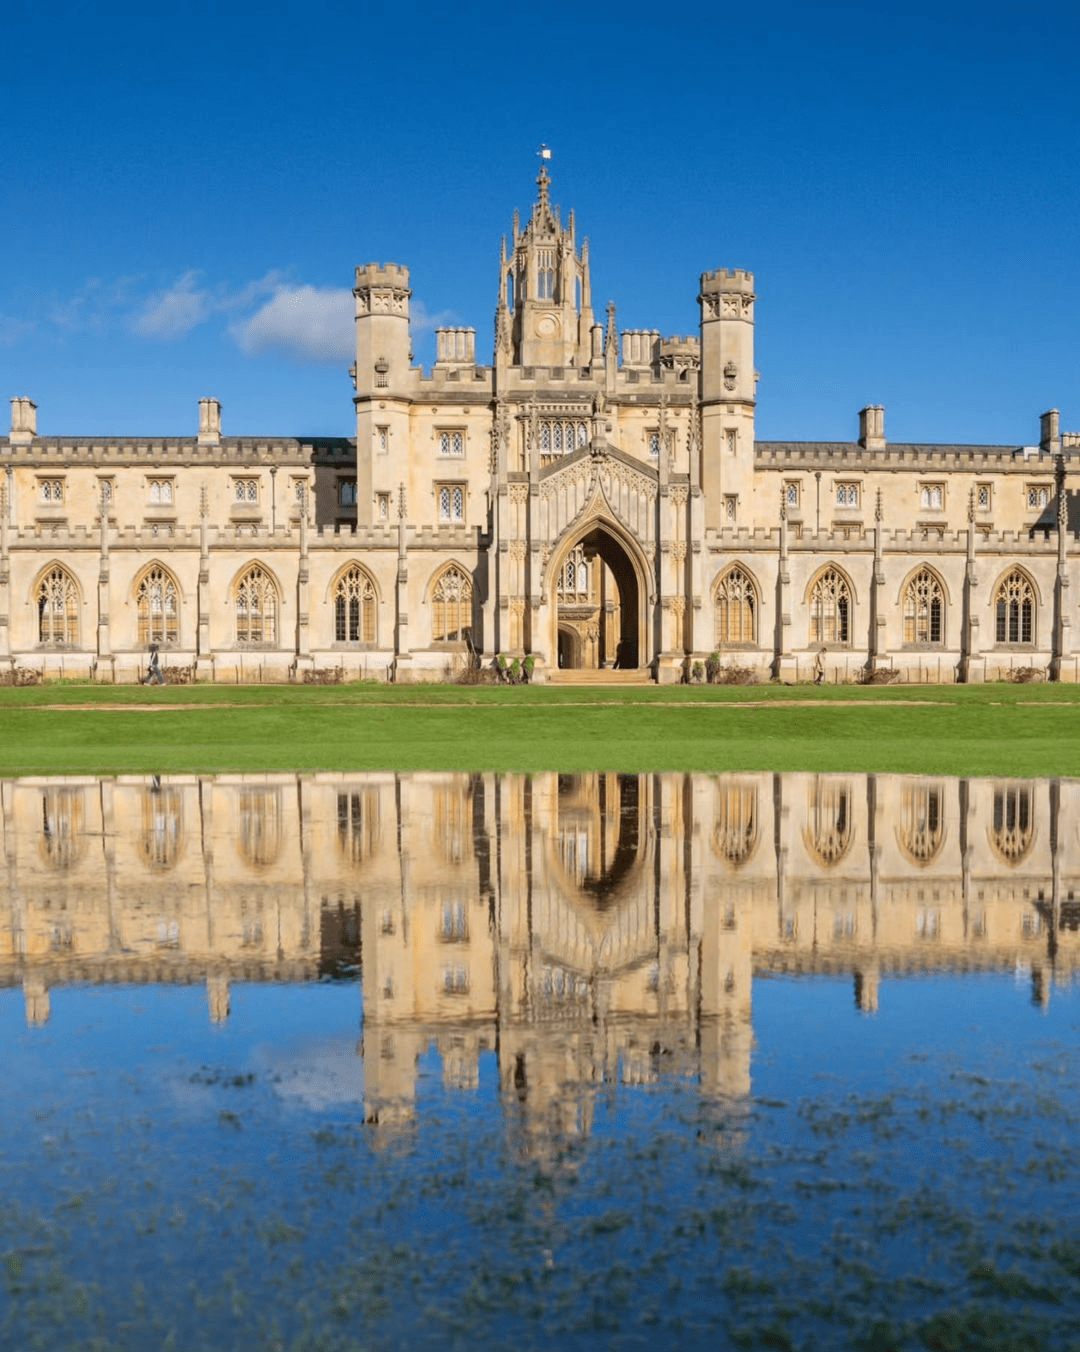 The most beautiful universities in the world: buildings to see while traveling